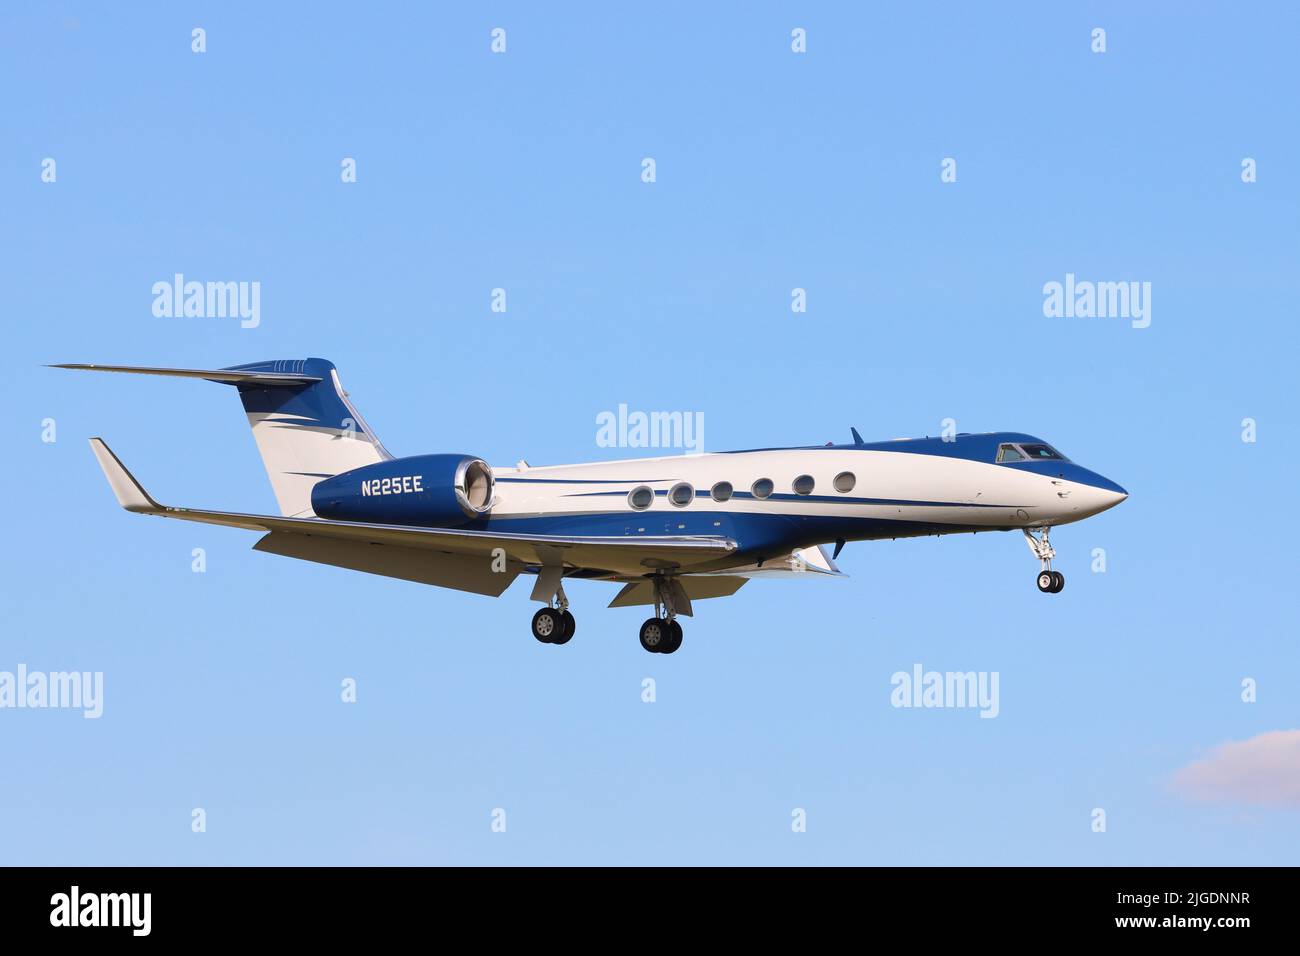 Gulfstream Aerospace G-V, N225EE, landing at Stansted Airport, Essex, UK Stock Photo